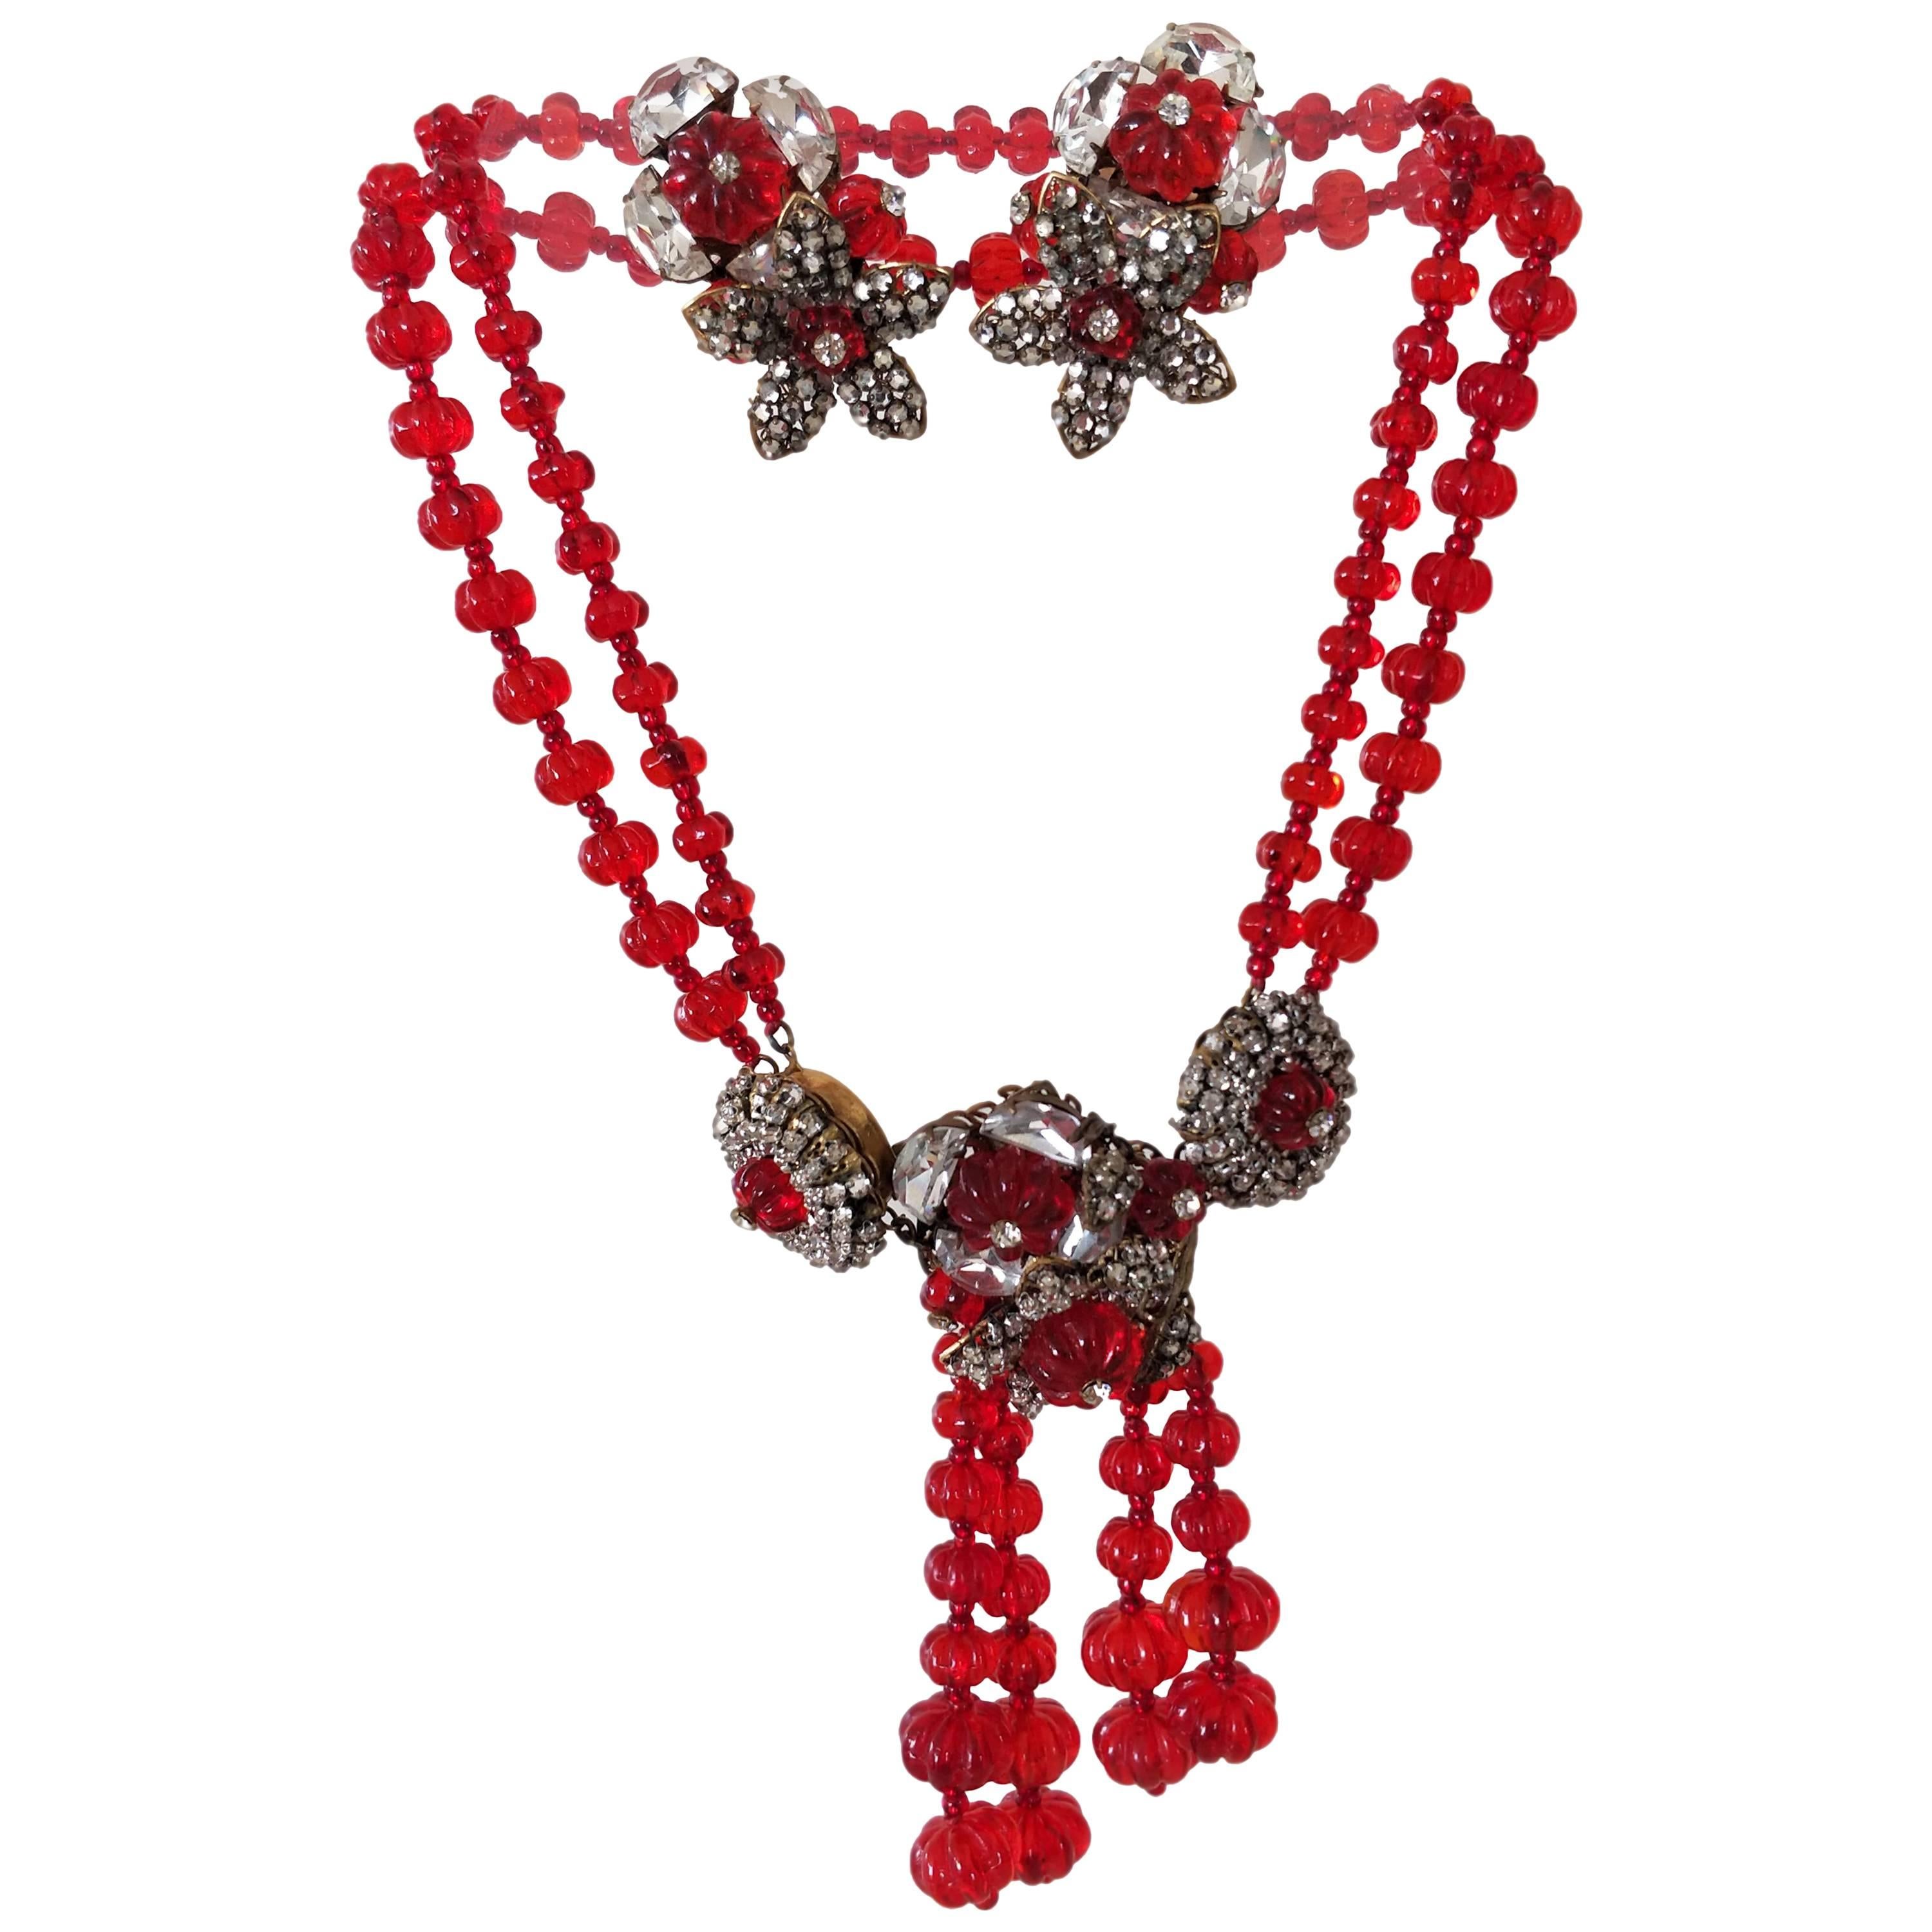 1940s Miriam Haskell Ruby Red Glass Bead, Rhinestone Necklace and